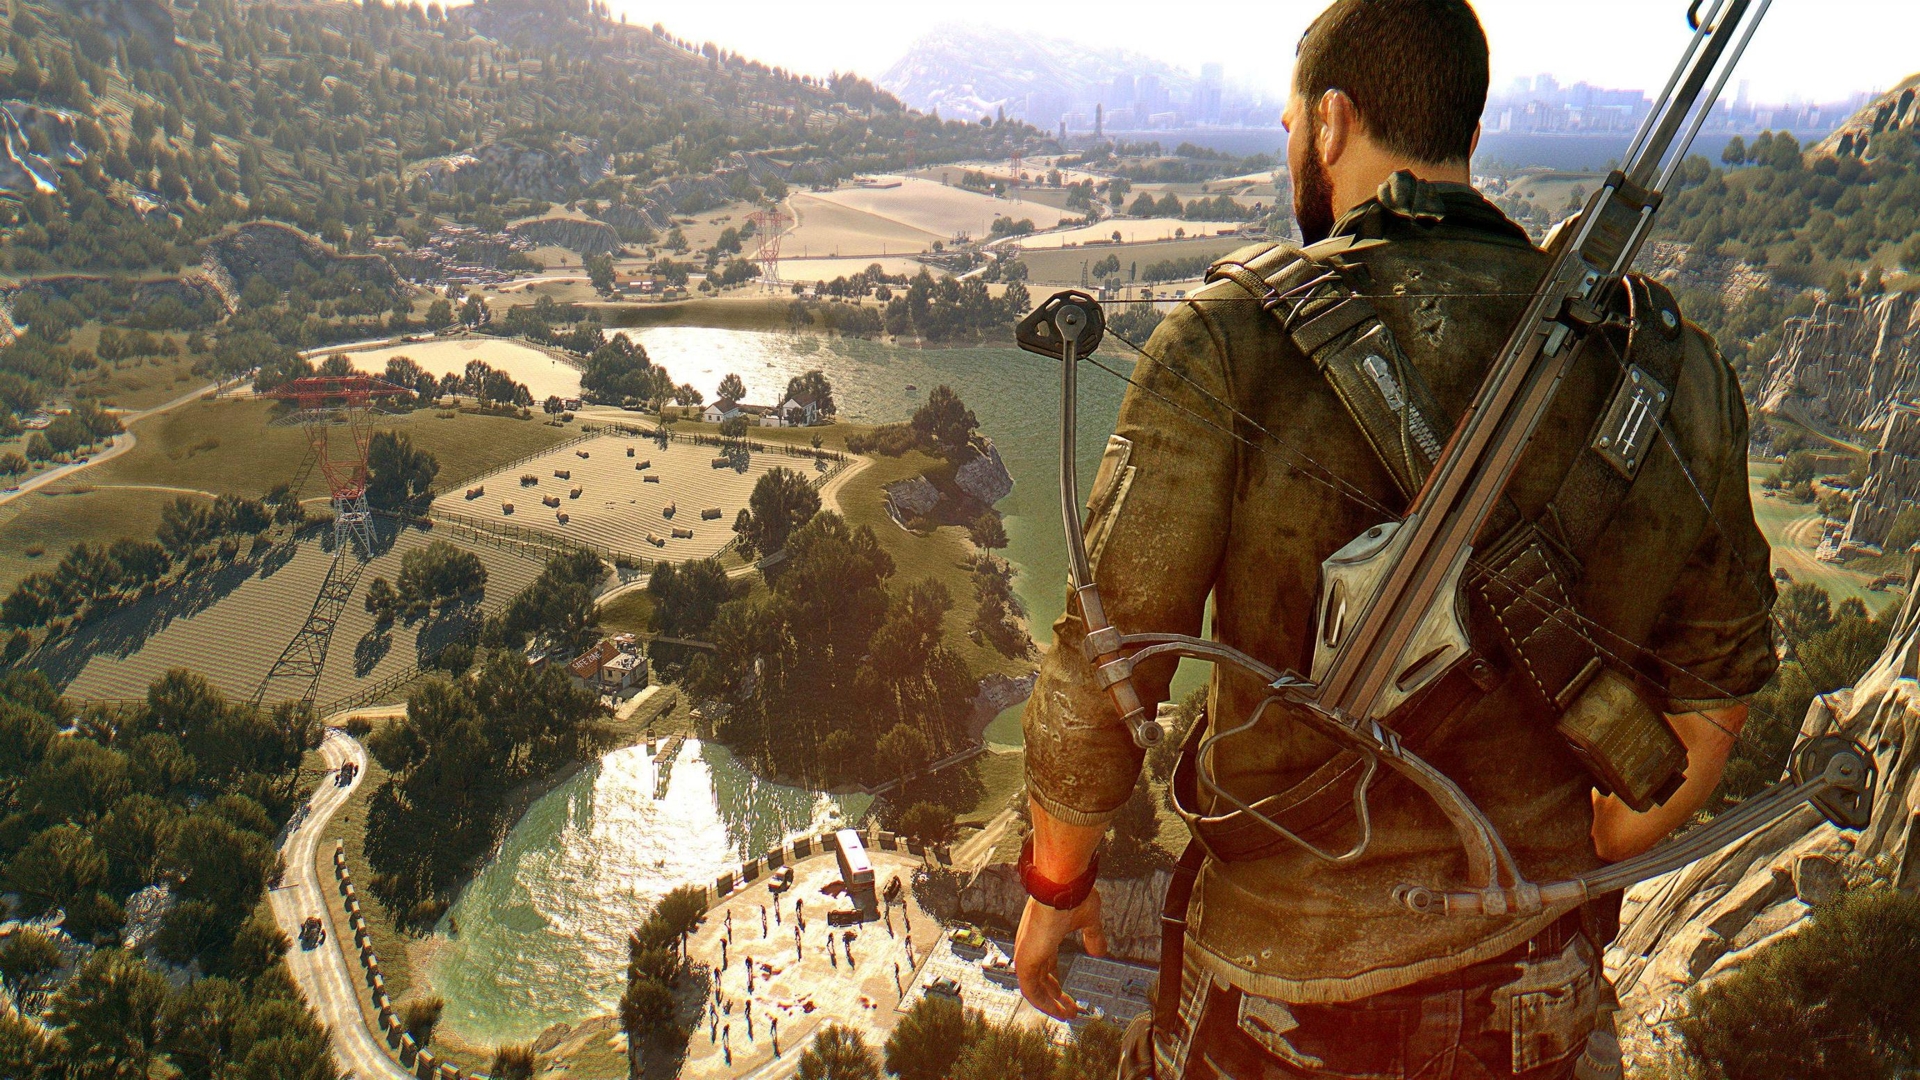 Media asset in full size related to 3dfxzone.it news item entitled as follows: Techland pubblica un nuovo trailer sul DLC The Following di Dying Light | Image Name: news23704_Dying-Light-Screenshot_1.jpg